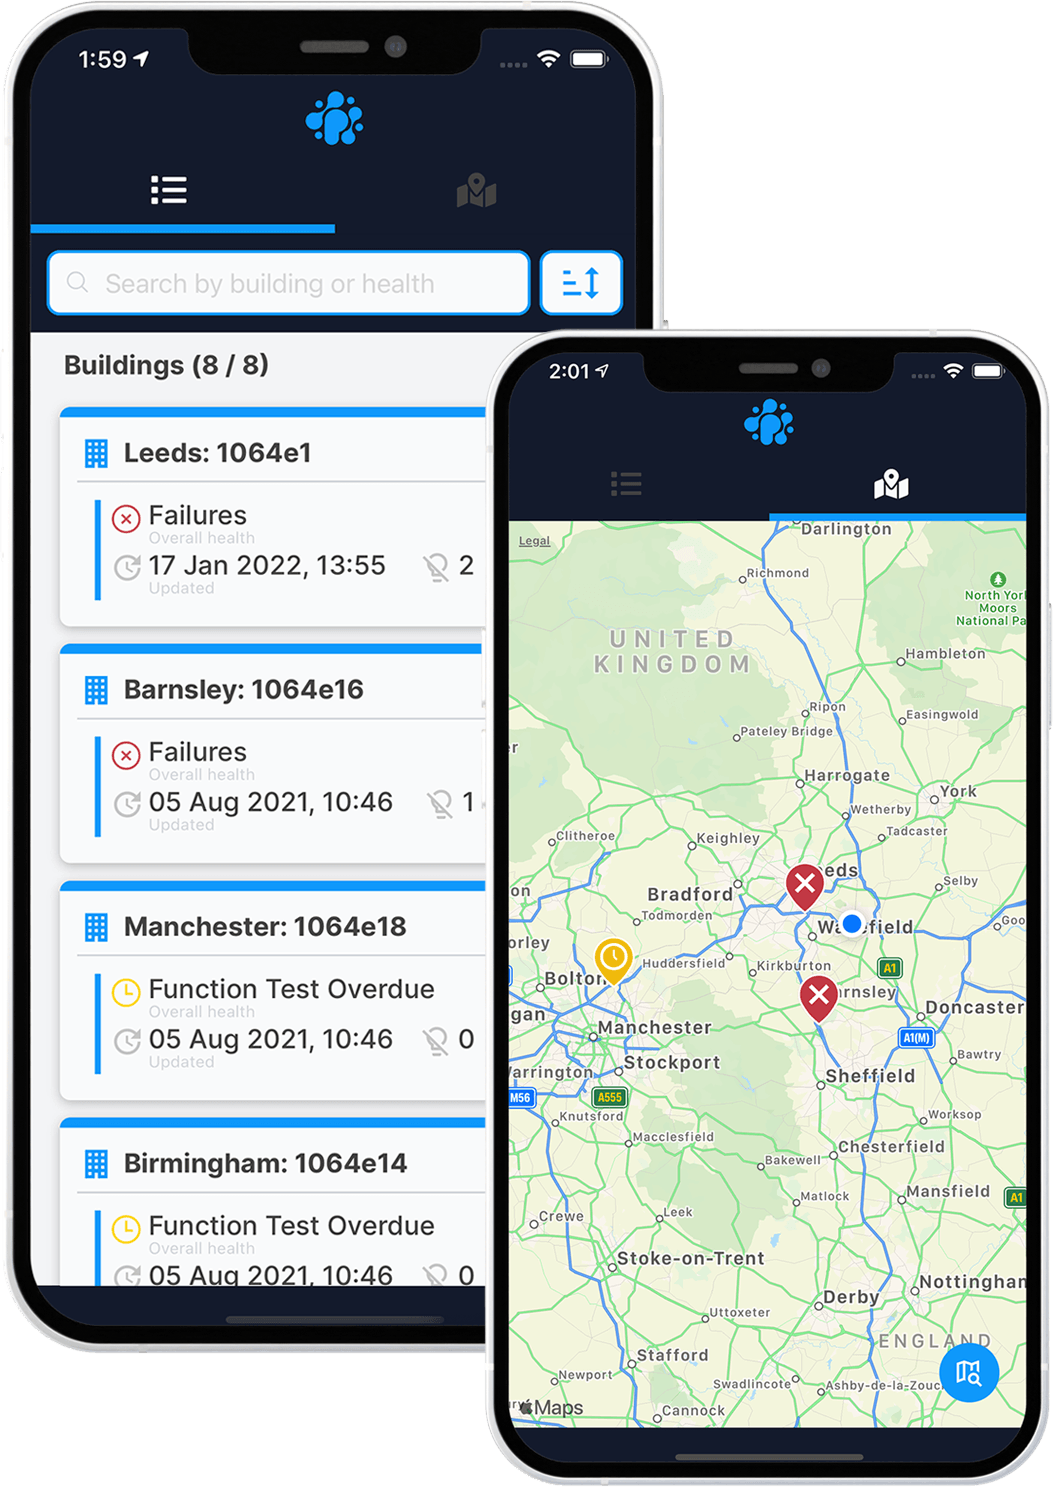 Image of two mobile devices showing pushfusion app in a vertical position. The one on the left is showing building list and the on the right is showing the same list but on a digital map.